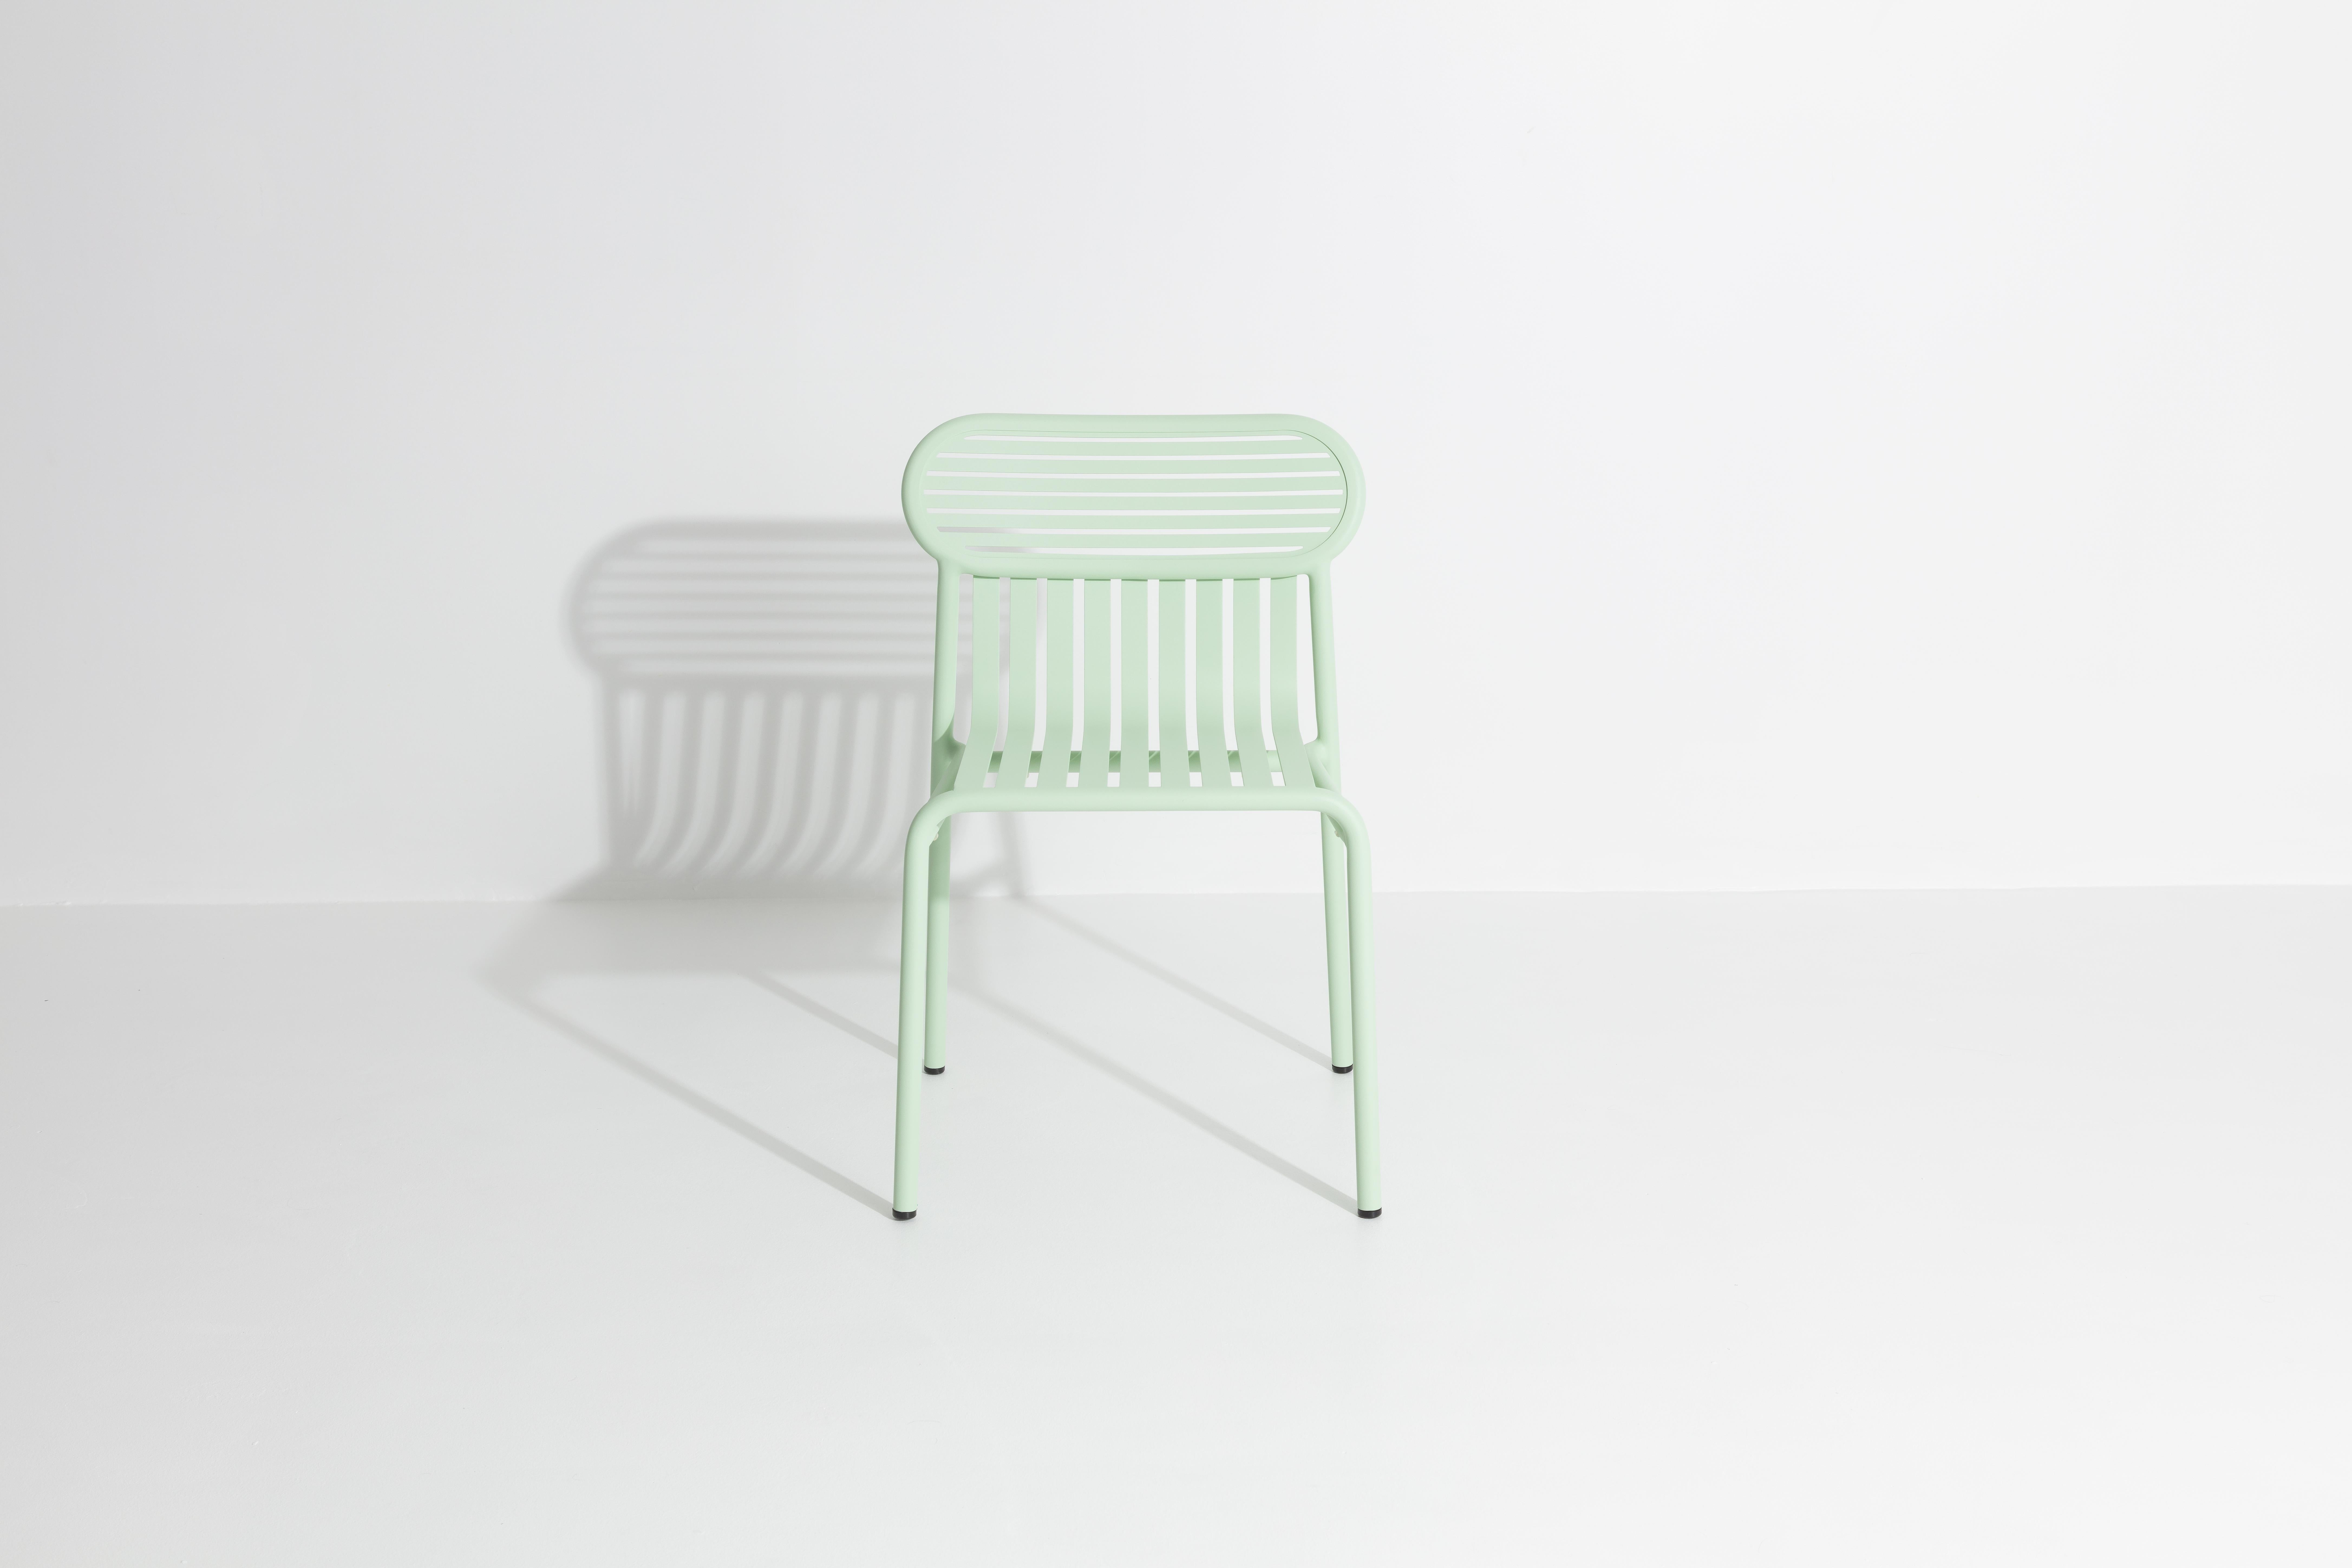 Petite Friture Week-End Chair in Pastel Green Aluminium by Studio BrichetZiegler, 2017

The week-end collection is a full range of outdoor furniture, in aluminium grained epoxy paint, matt finish, that includes 18 functions and 8 colours for the